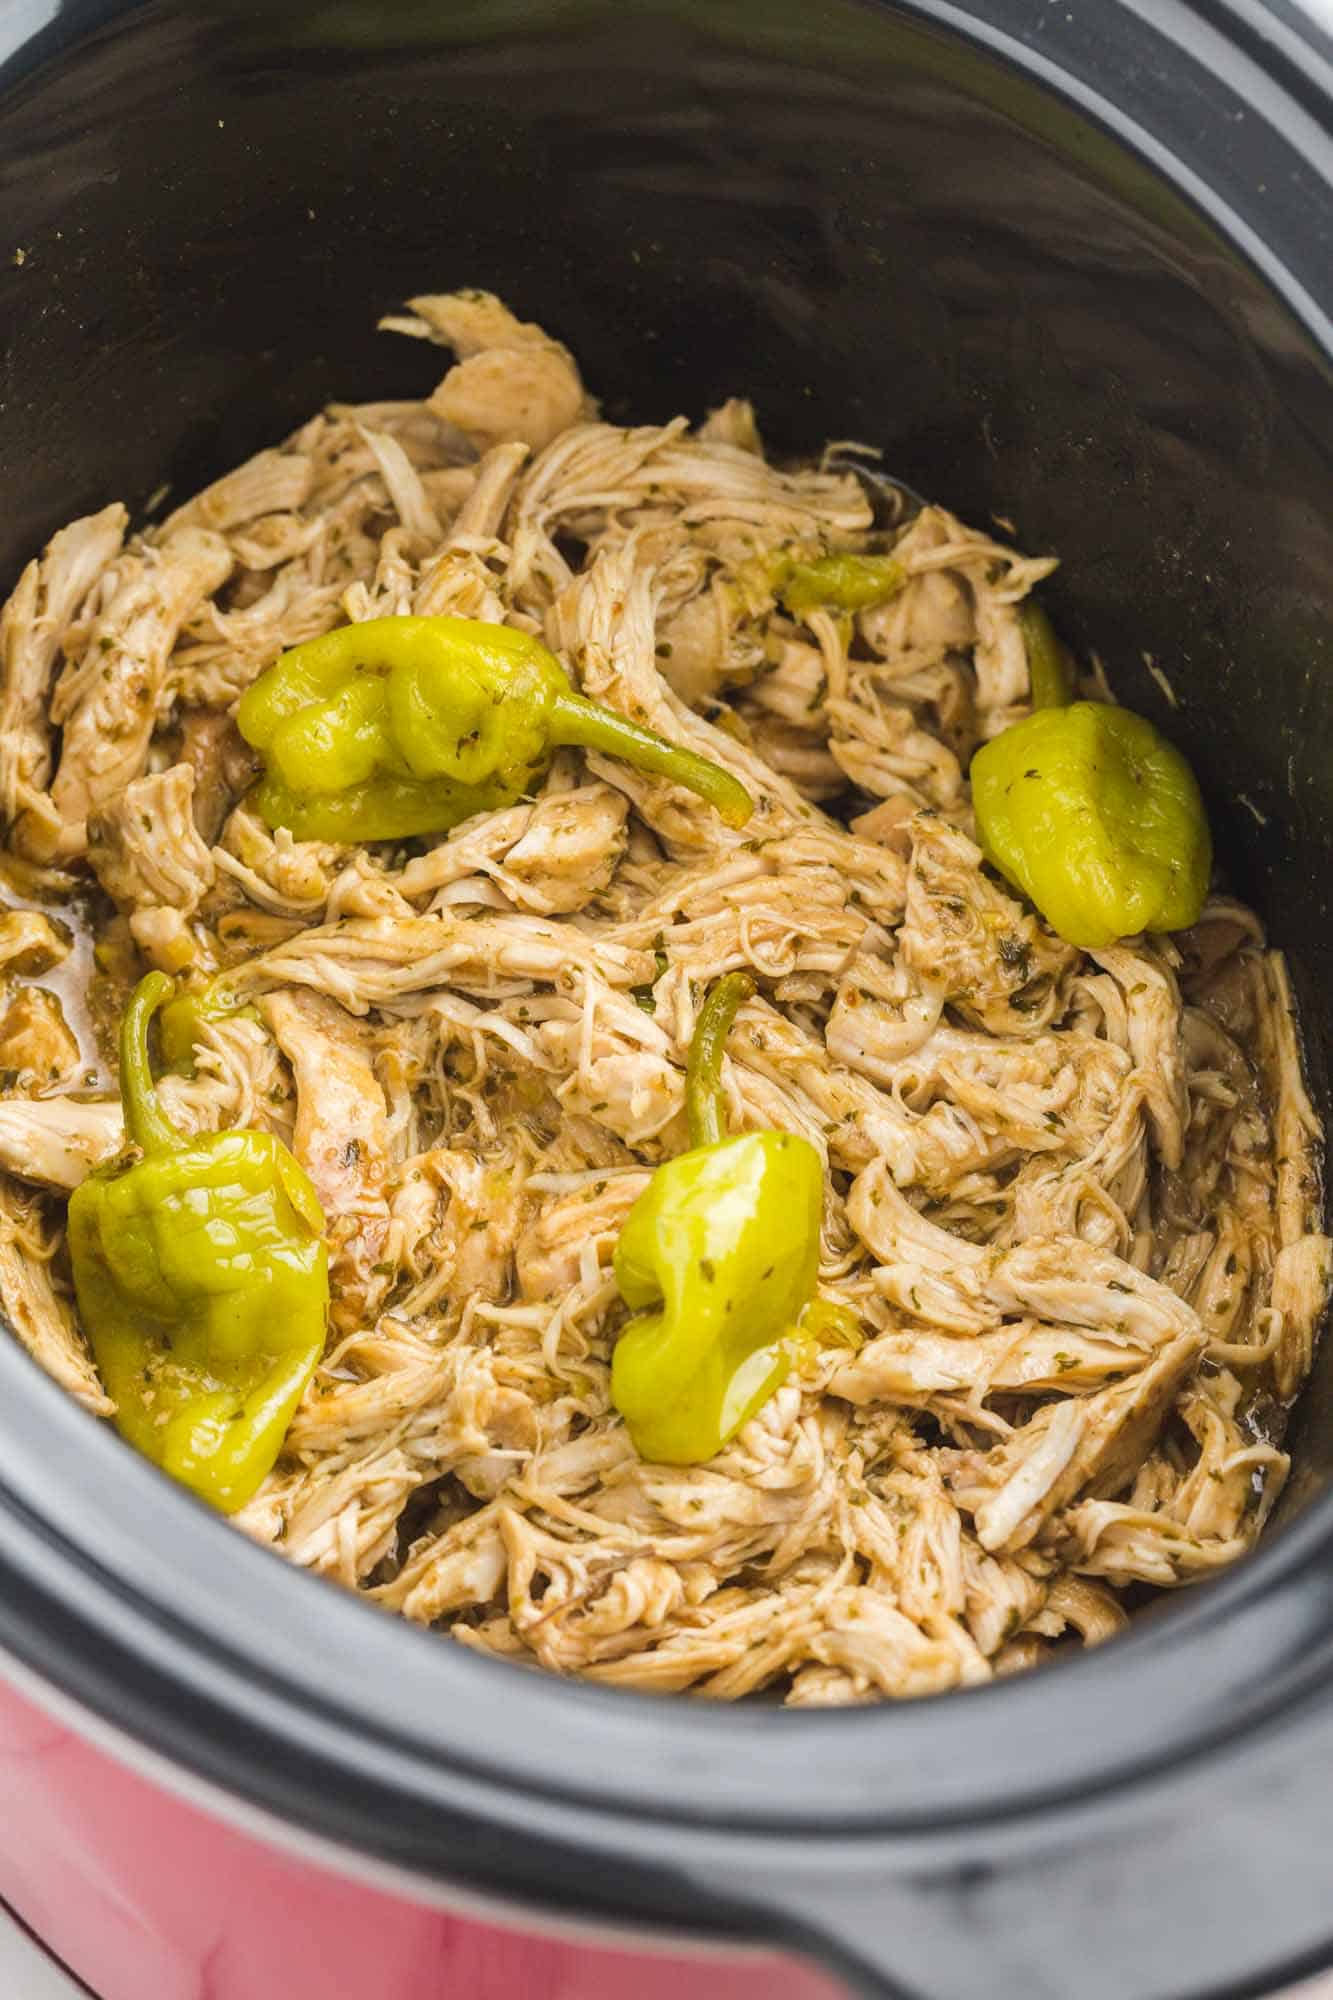 shredded mississippi chicken and pepperoncini in a black slow cooker.